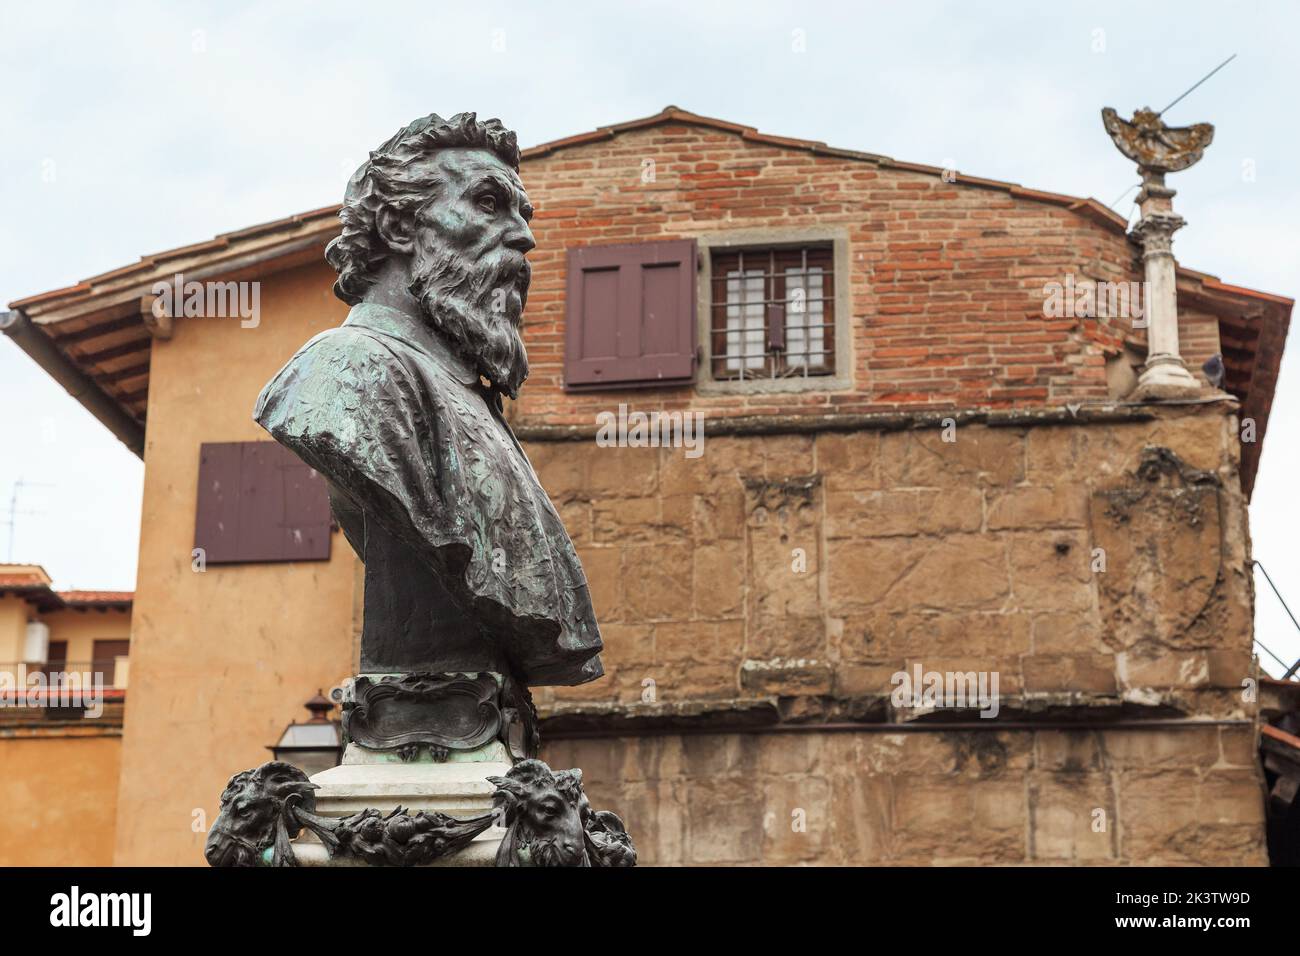 FLORENCE, ITALY - SEPTEMBER 13, 2018: This is a bust of Benvenuto Cellini on the Old Bridge (Ponte Vecchio). Stock Photo